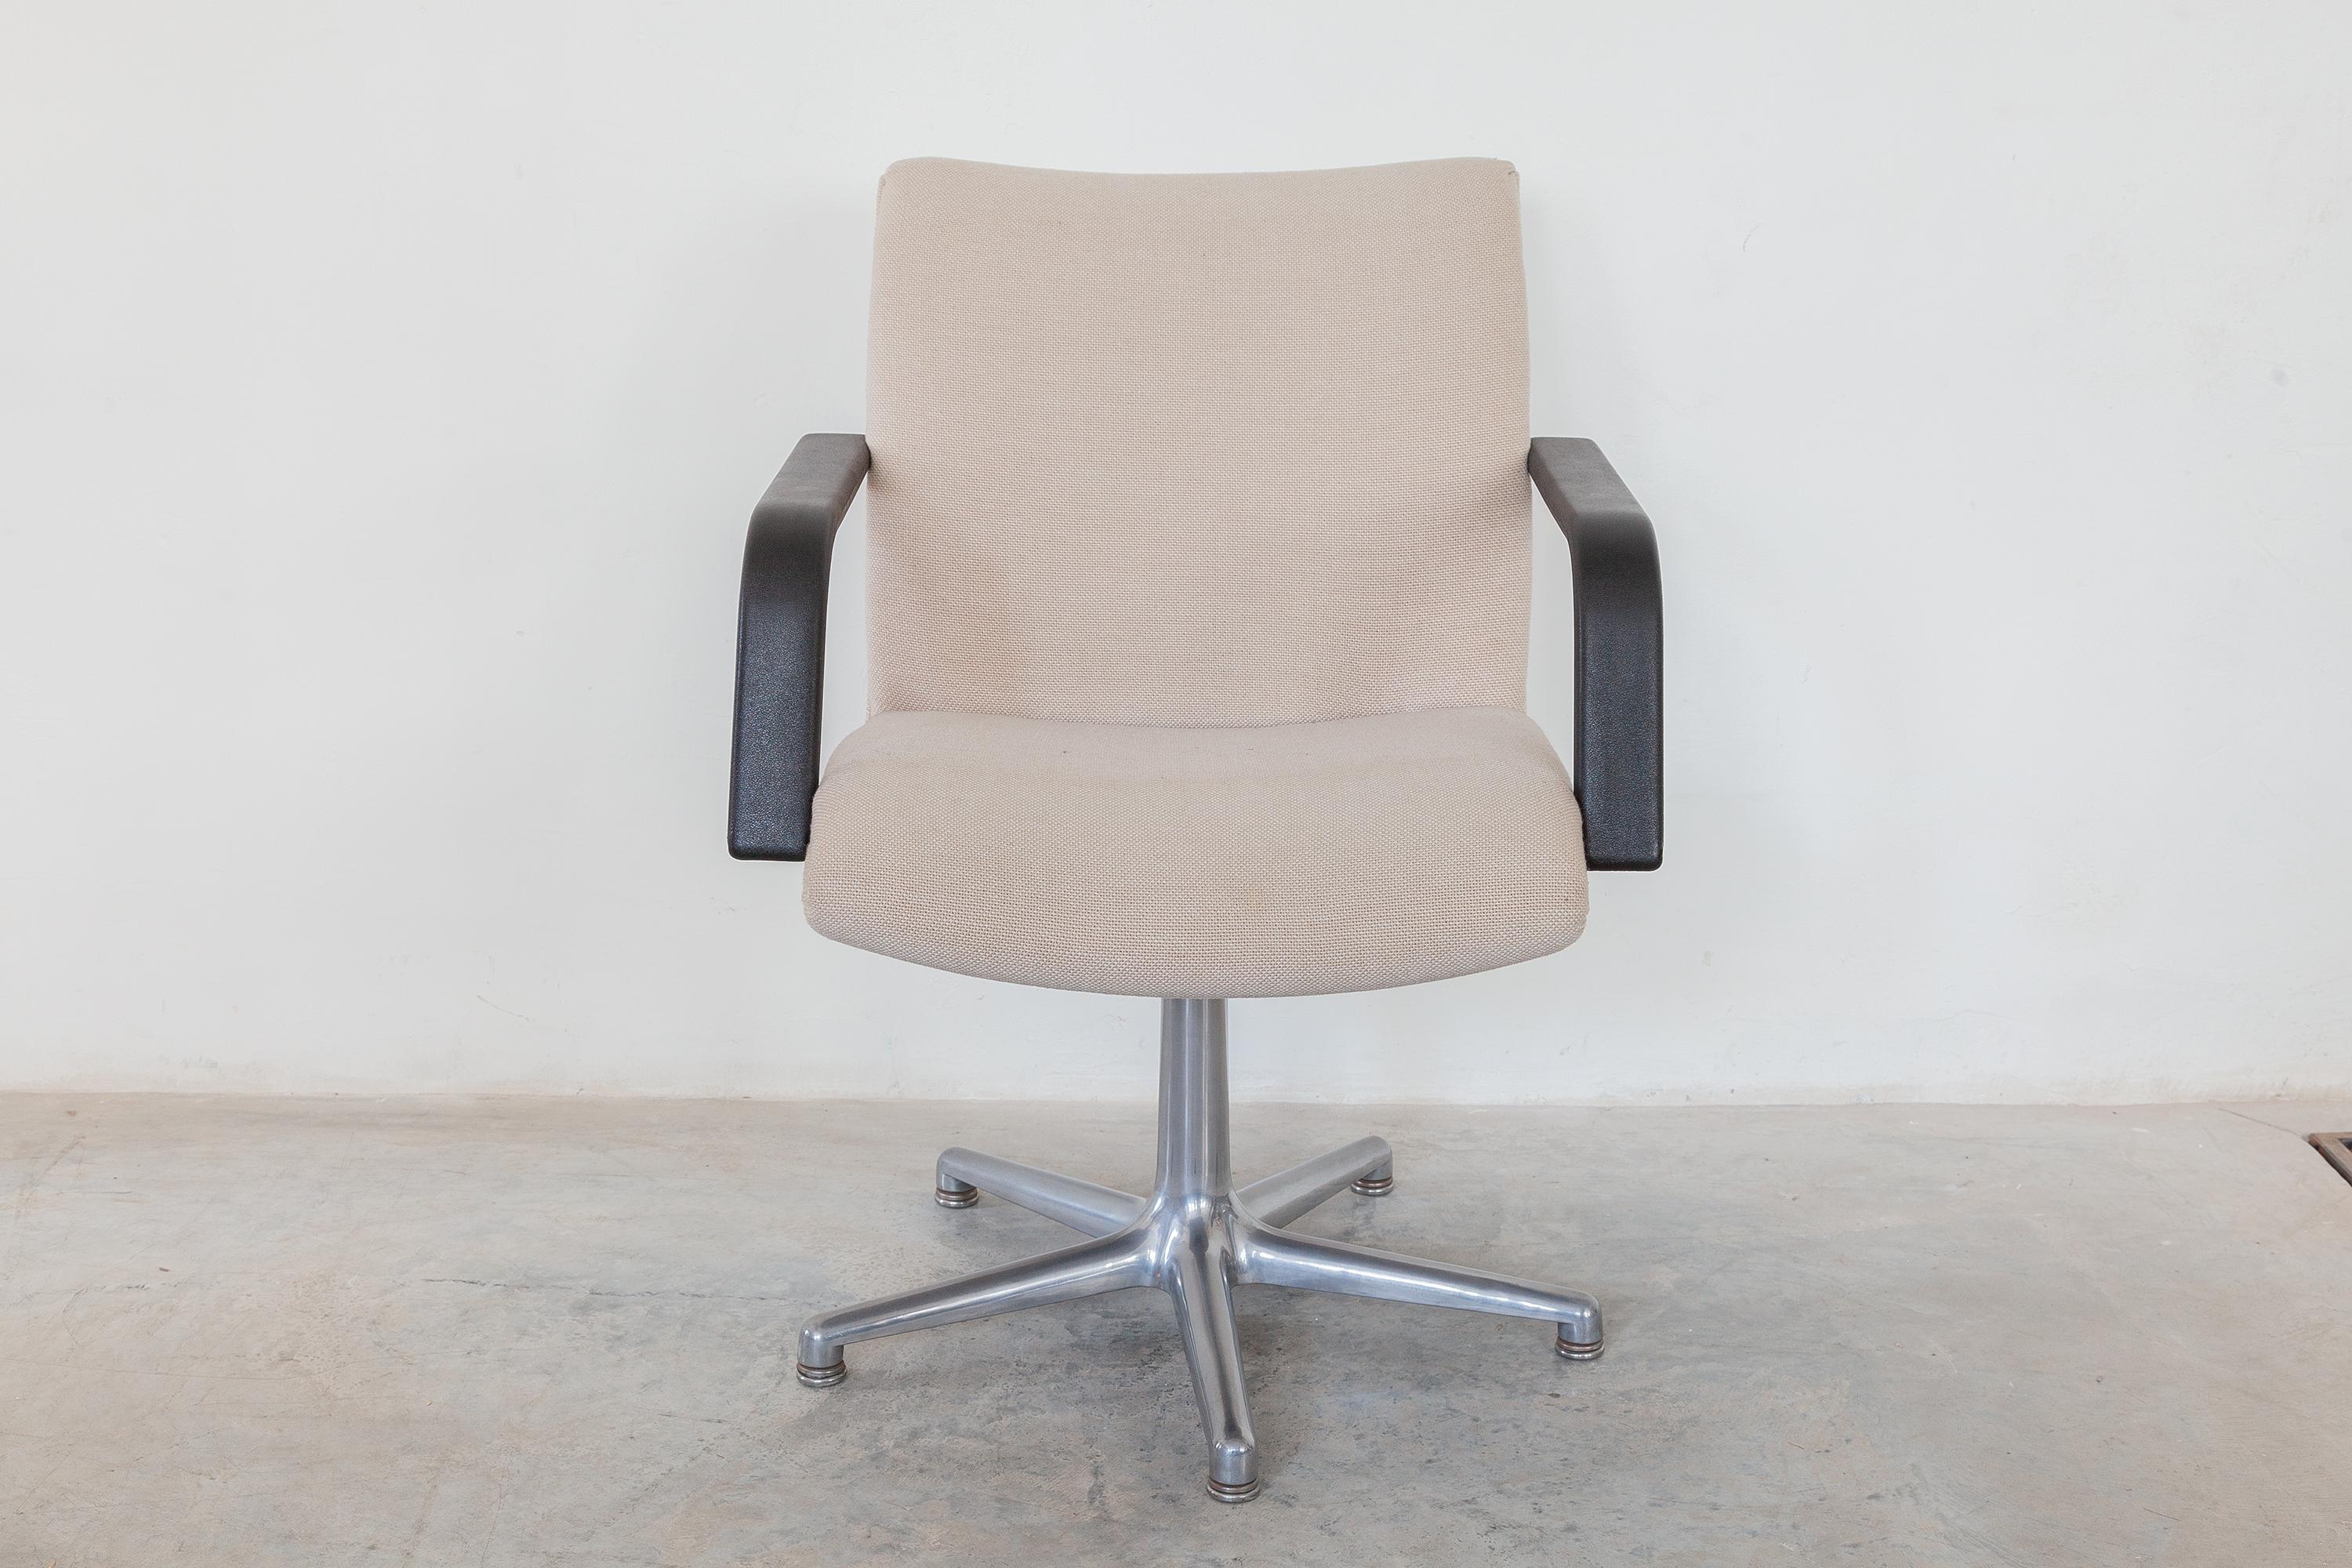 Iconic 1970s design vintage office chairs by Artifort, Netherlands, 1970s. Original oatmeal colored wool upholstery. Chrome swivel base with black leather arm rests.
Dimensions: 64 W x 87 H x 55 D cm Seat: 43 cm-47cm high.